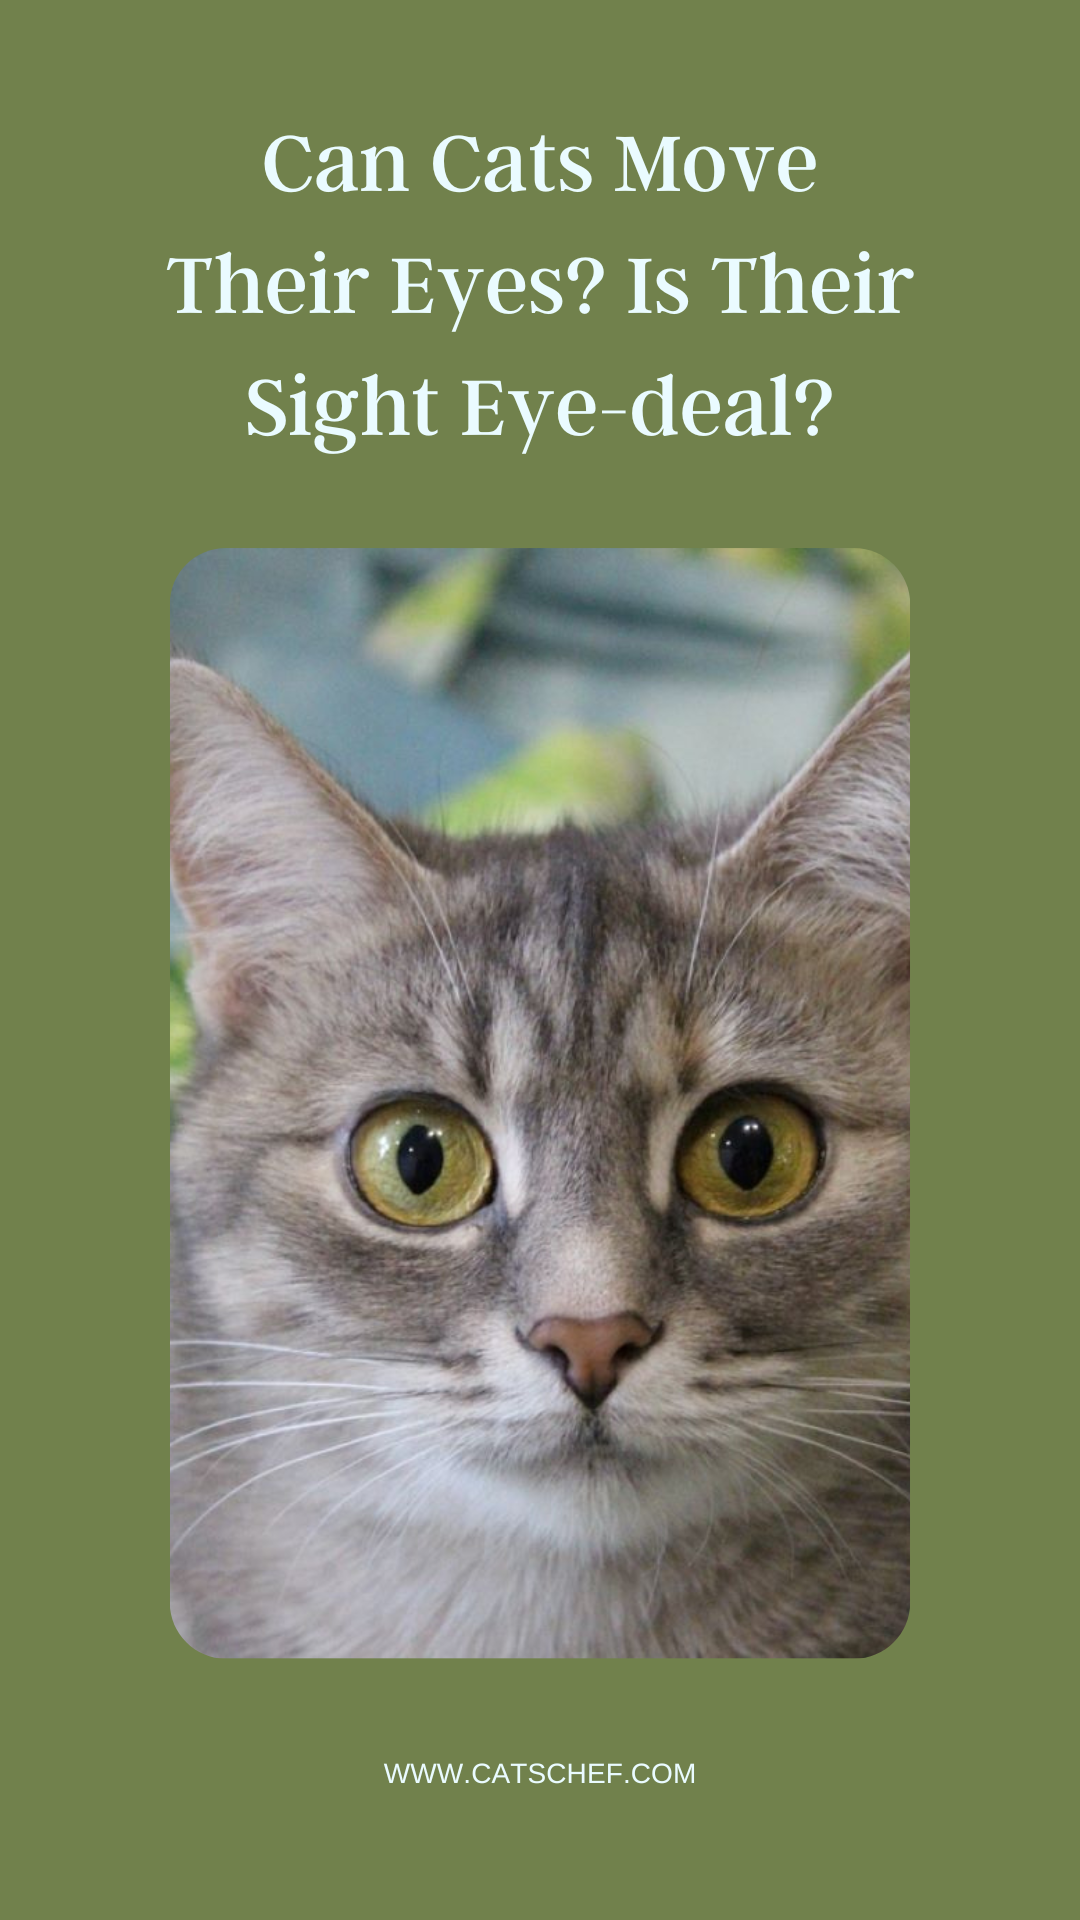 Can Cats Move Their Eyes? Is Their Sight Eye-deal?